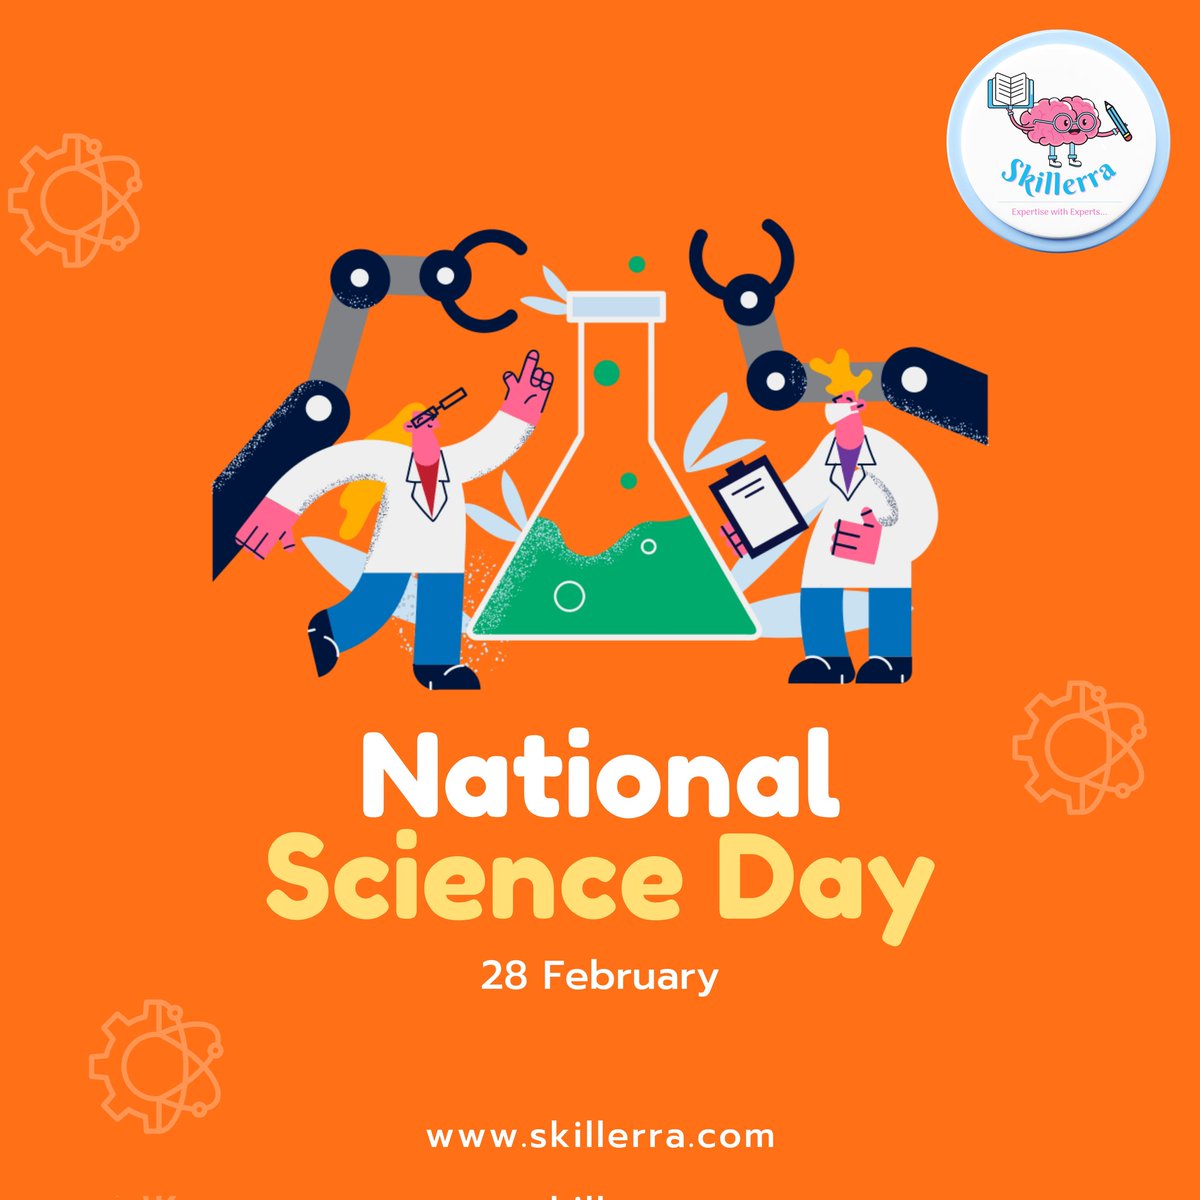 Today, let's celebrate the wonders of science and the power of human curiosity to unravel the mysteries of the universe. Happy National Science Day
#NationalScienceDay #ScienceWonder #HumanCuriosity #ScienceCommunication #WomenInScience #ScienceForAll #Innovation #Research #love